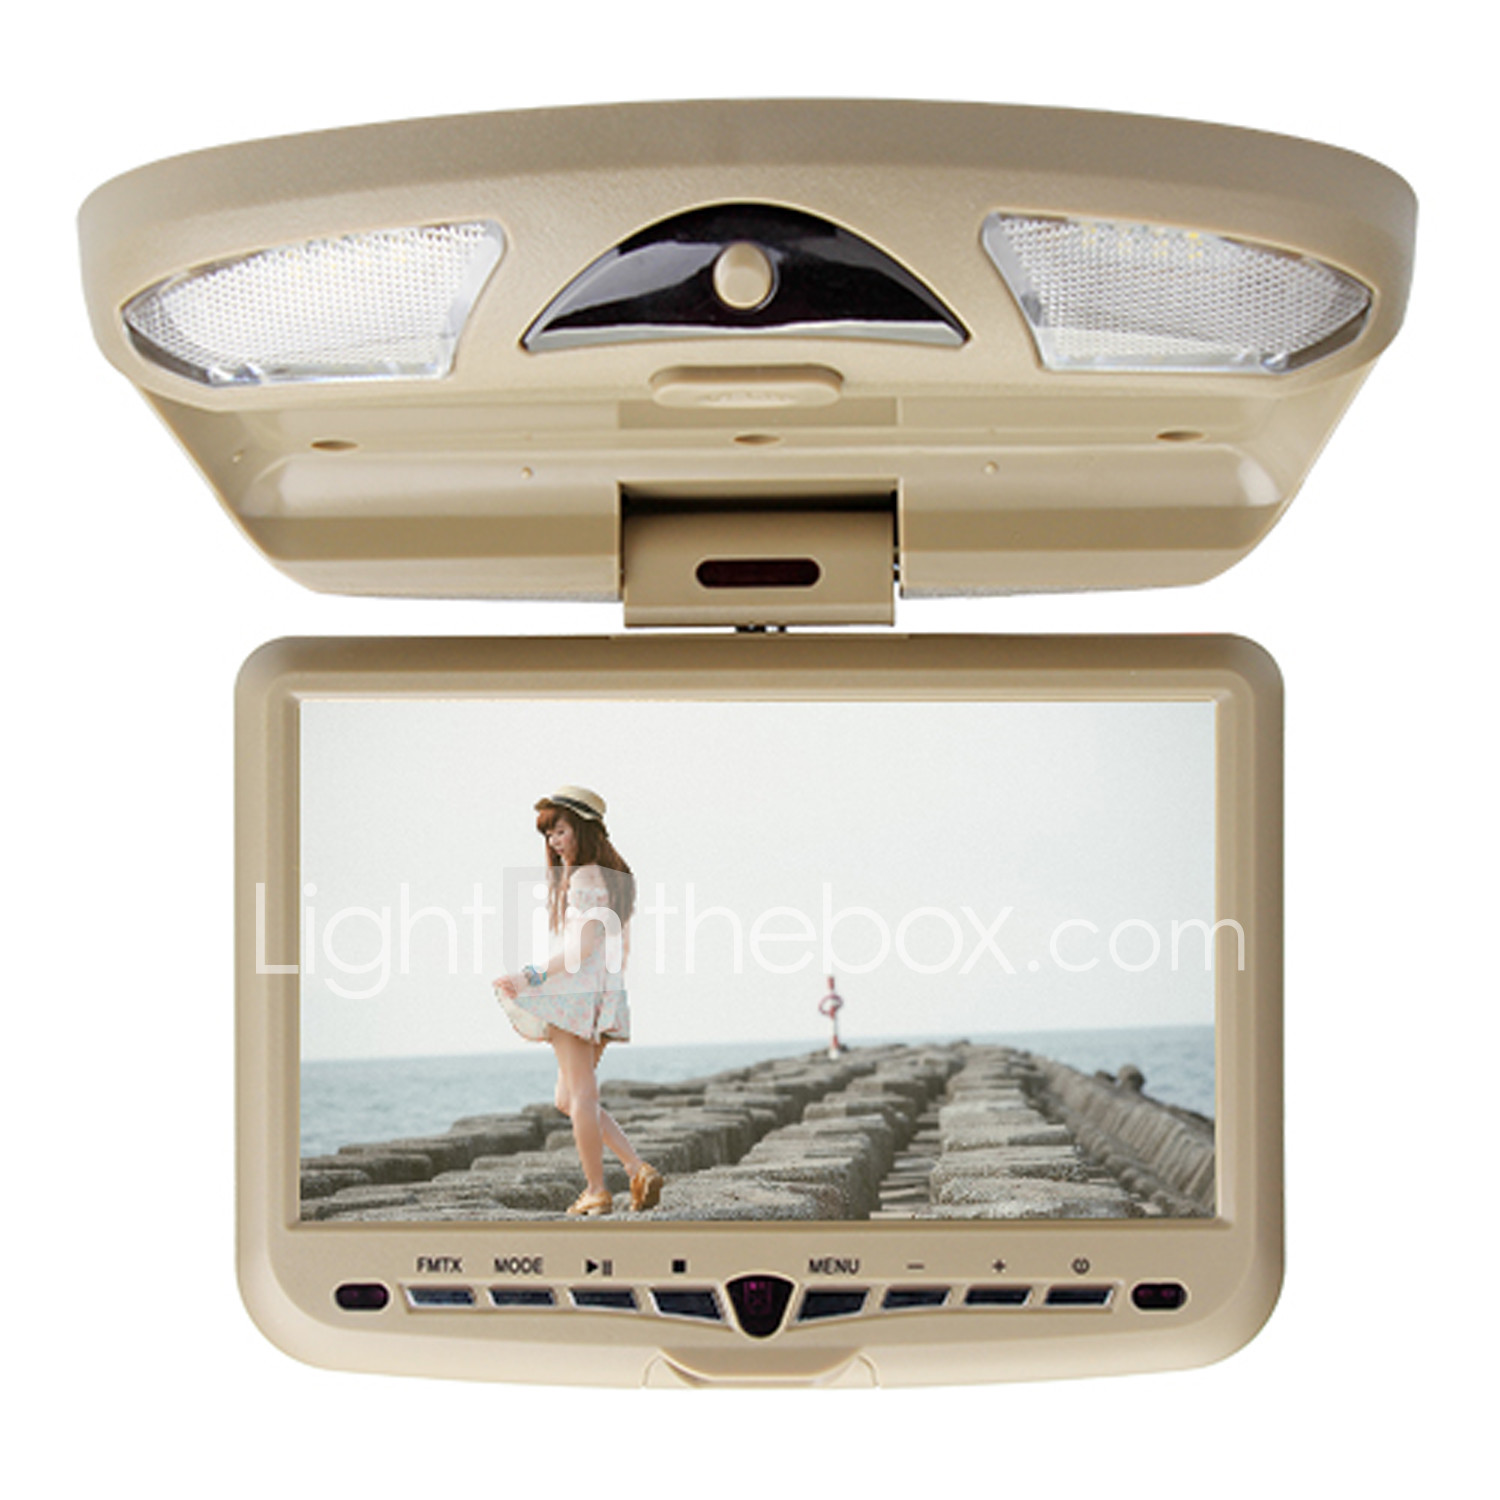 9 Roof Mount Car Dvd Player 443881 2020 94 59